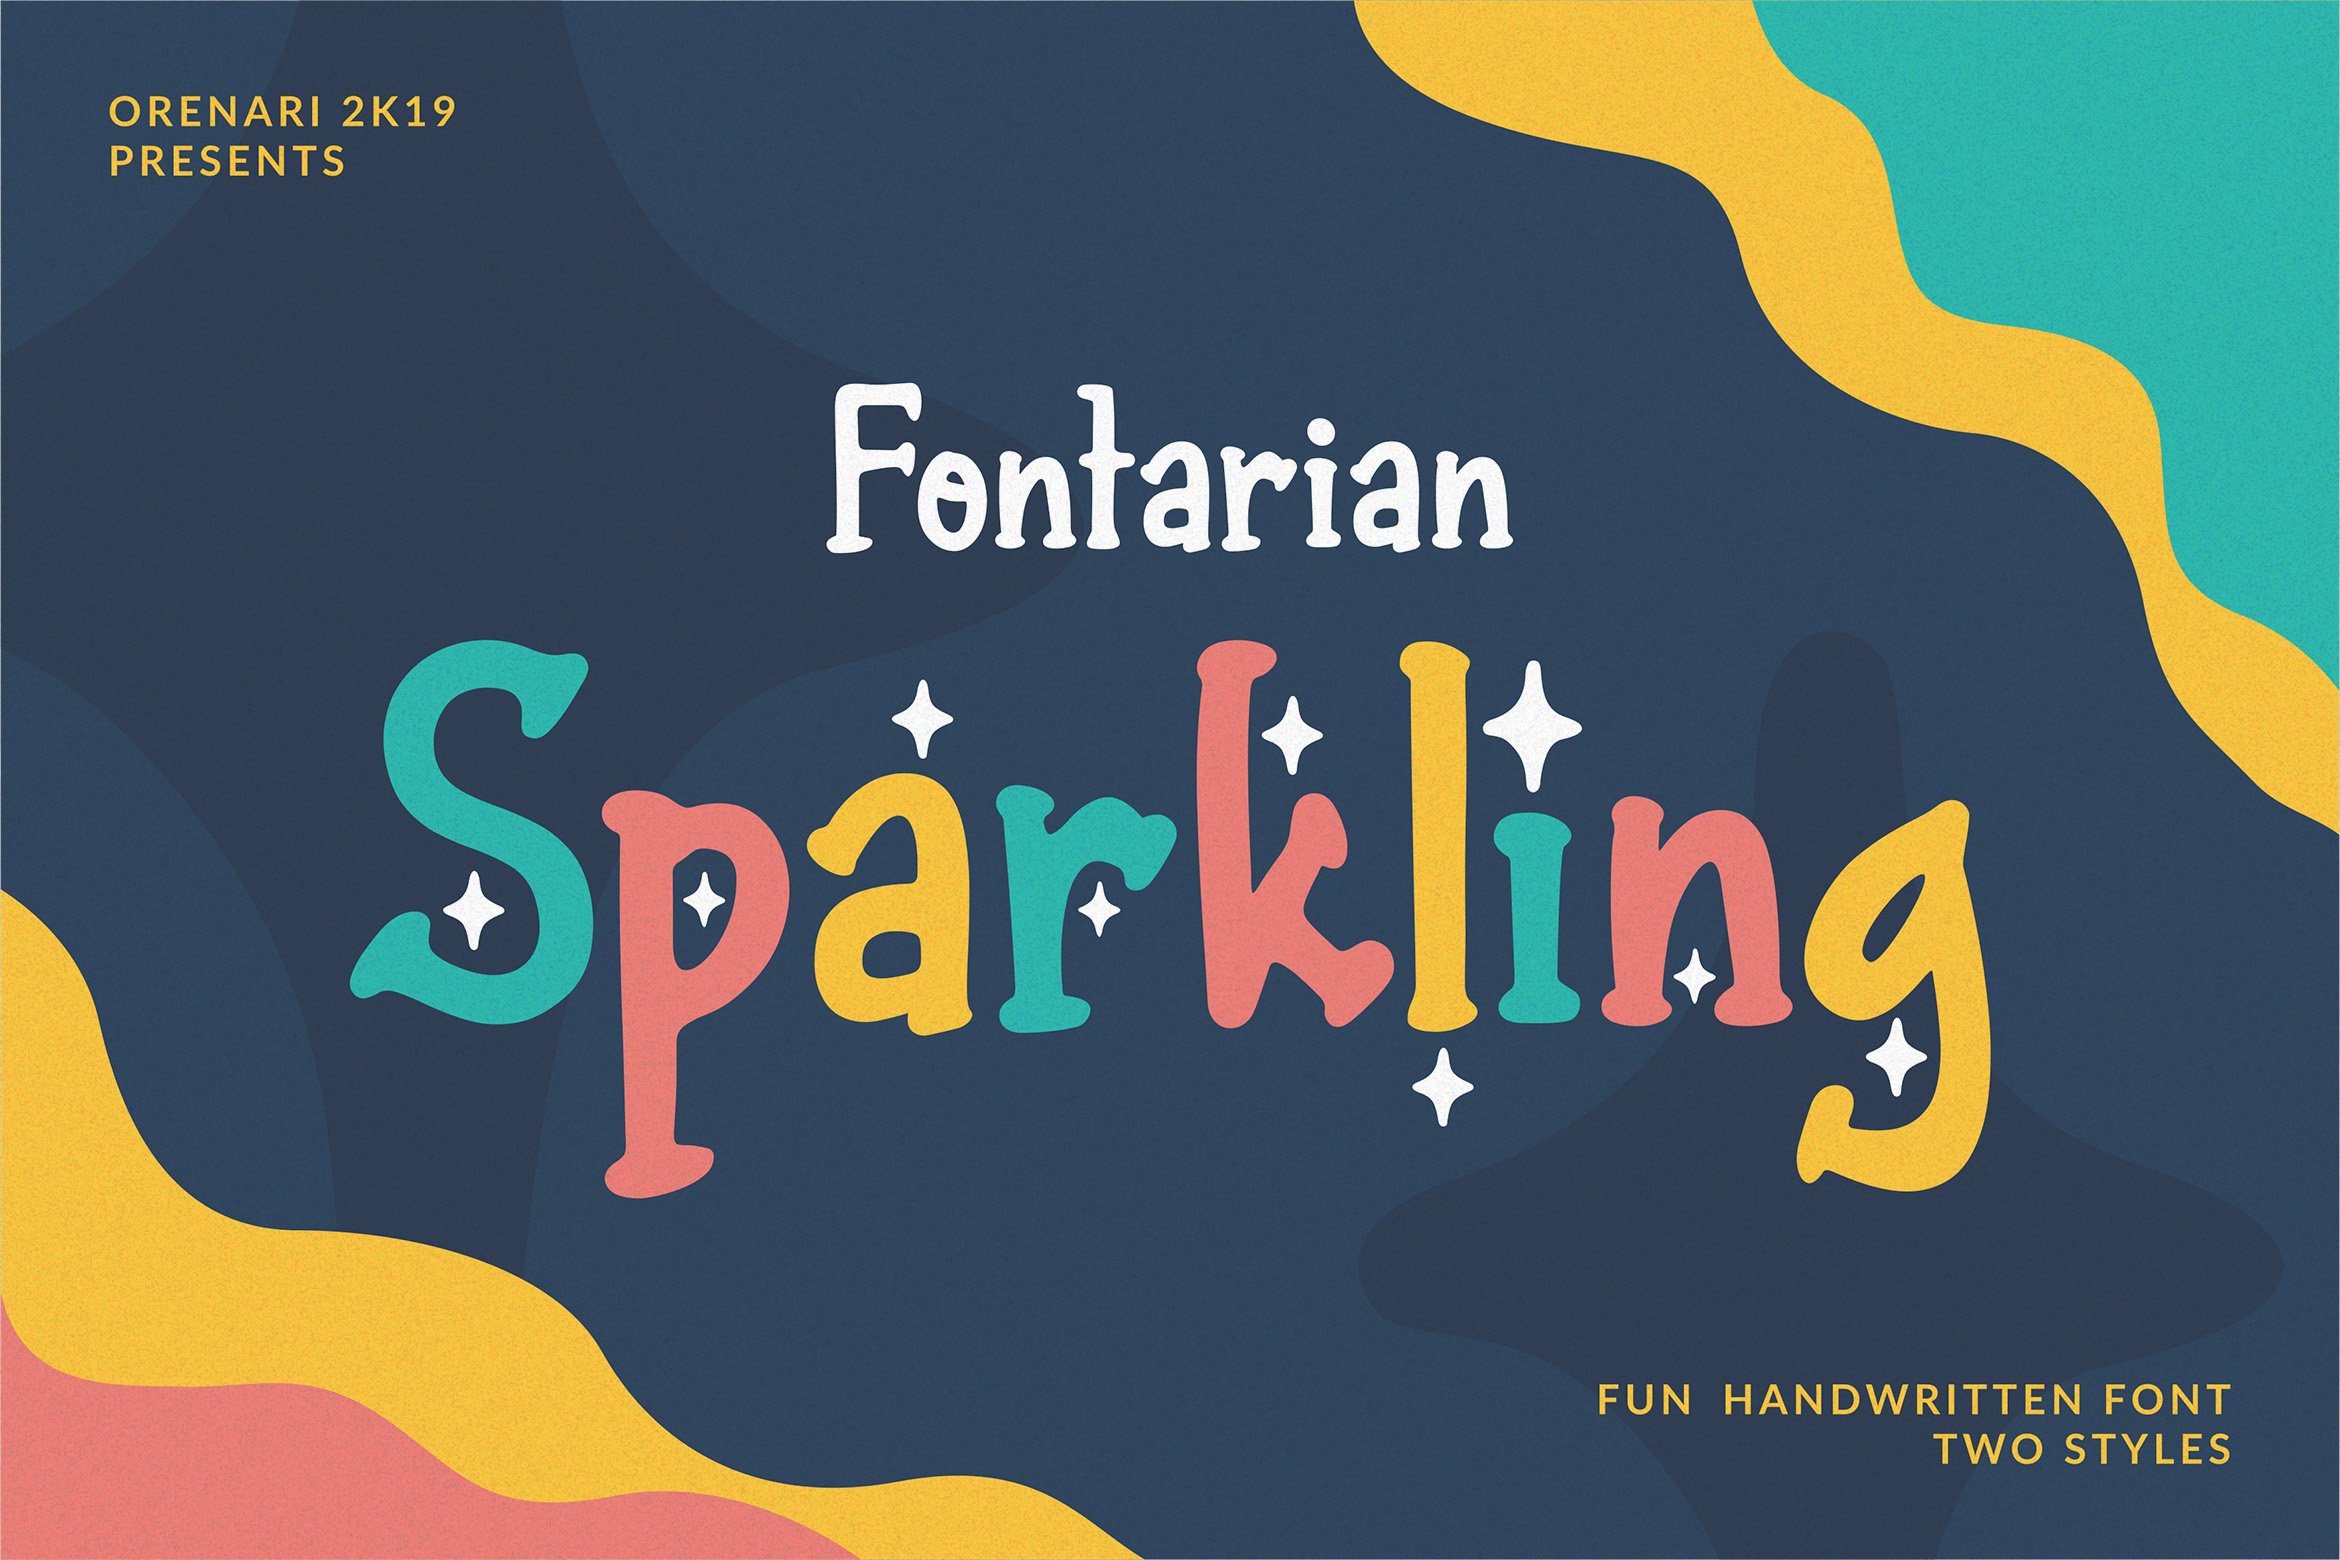 Fontarian Sparkling cover image.